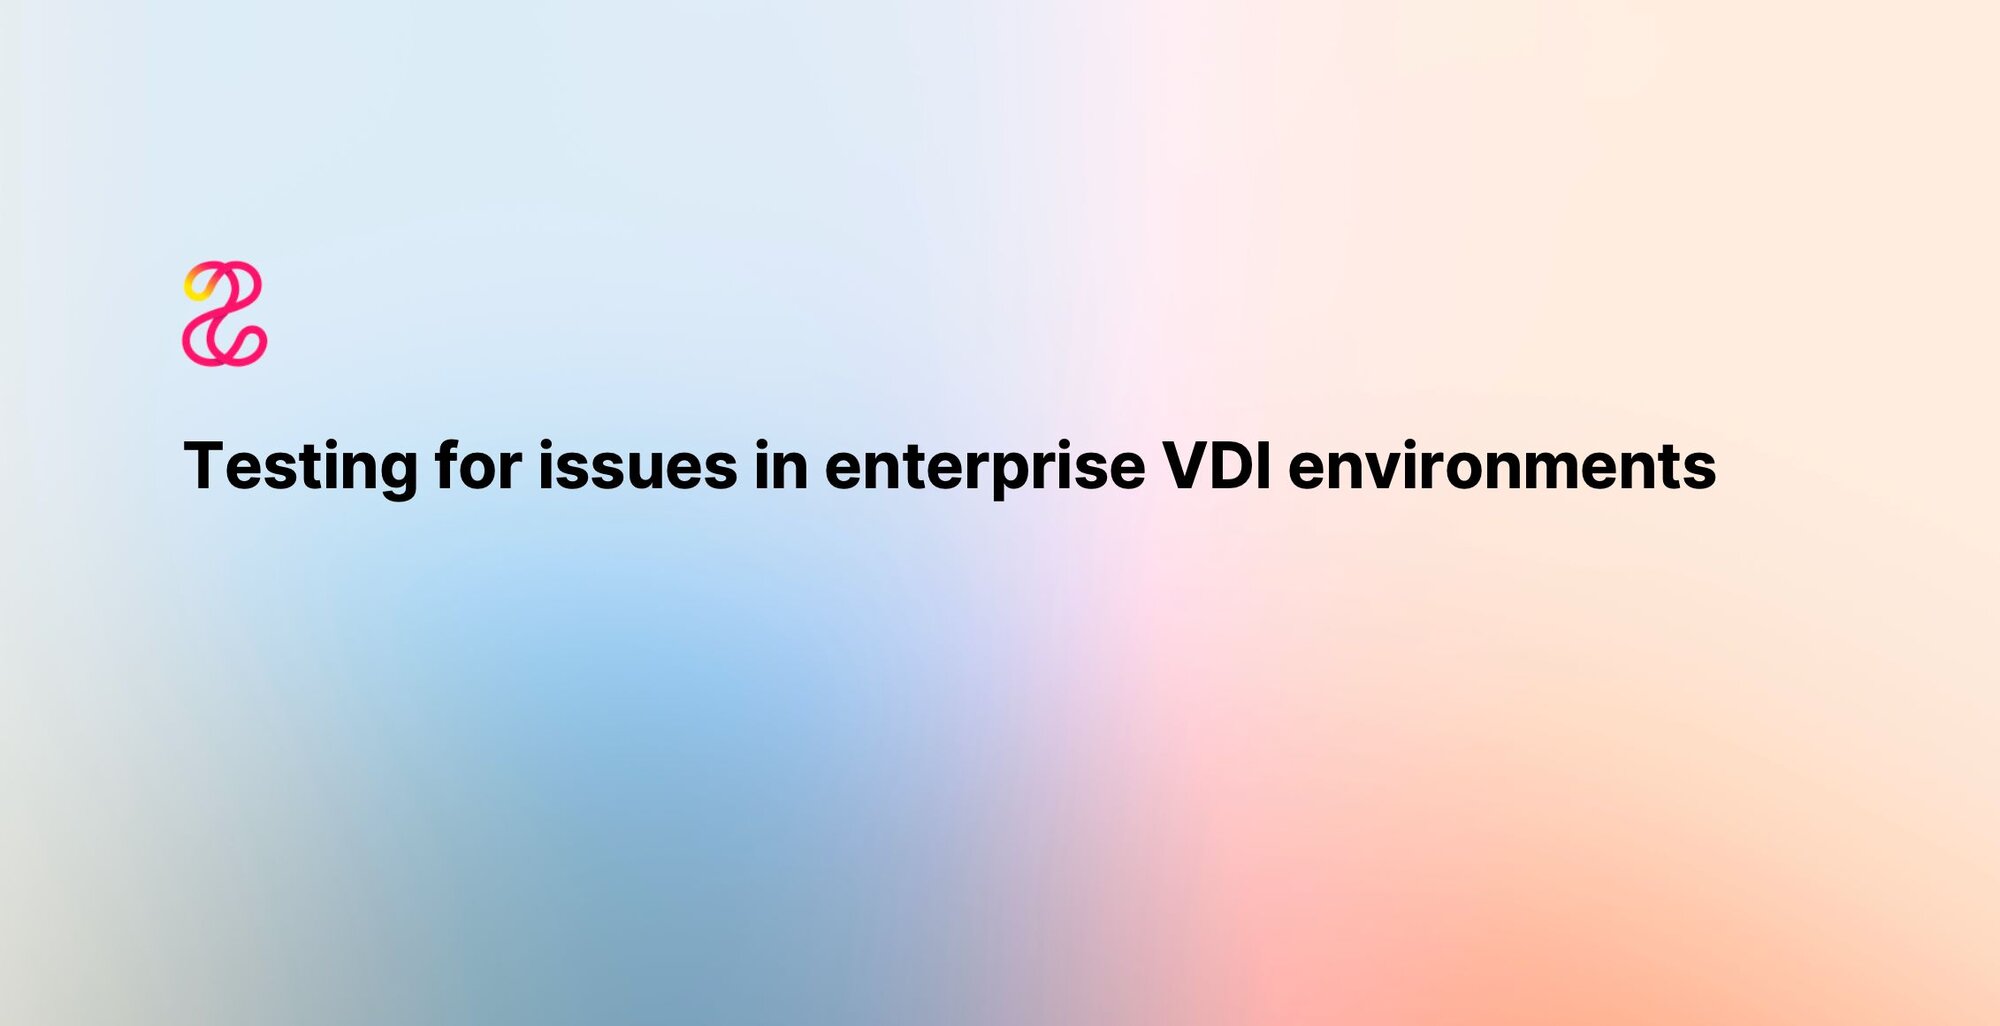 Testing for issues in enterprise VDI environments